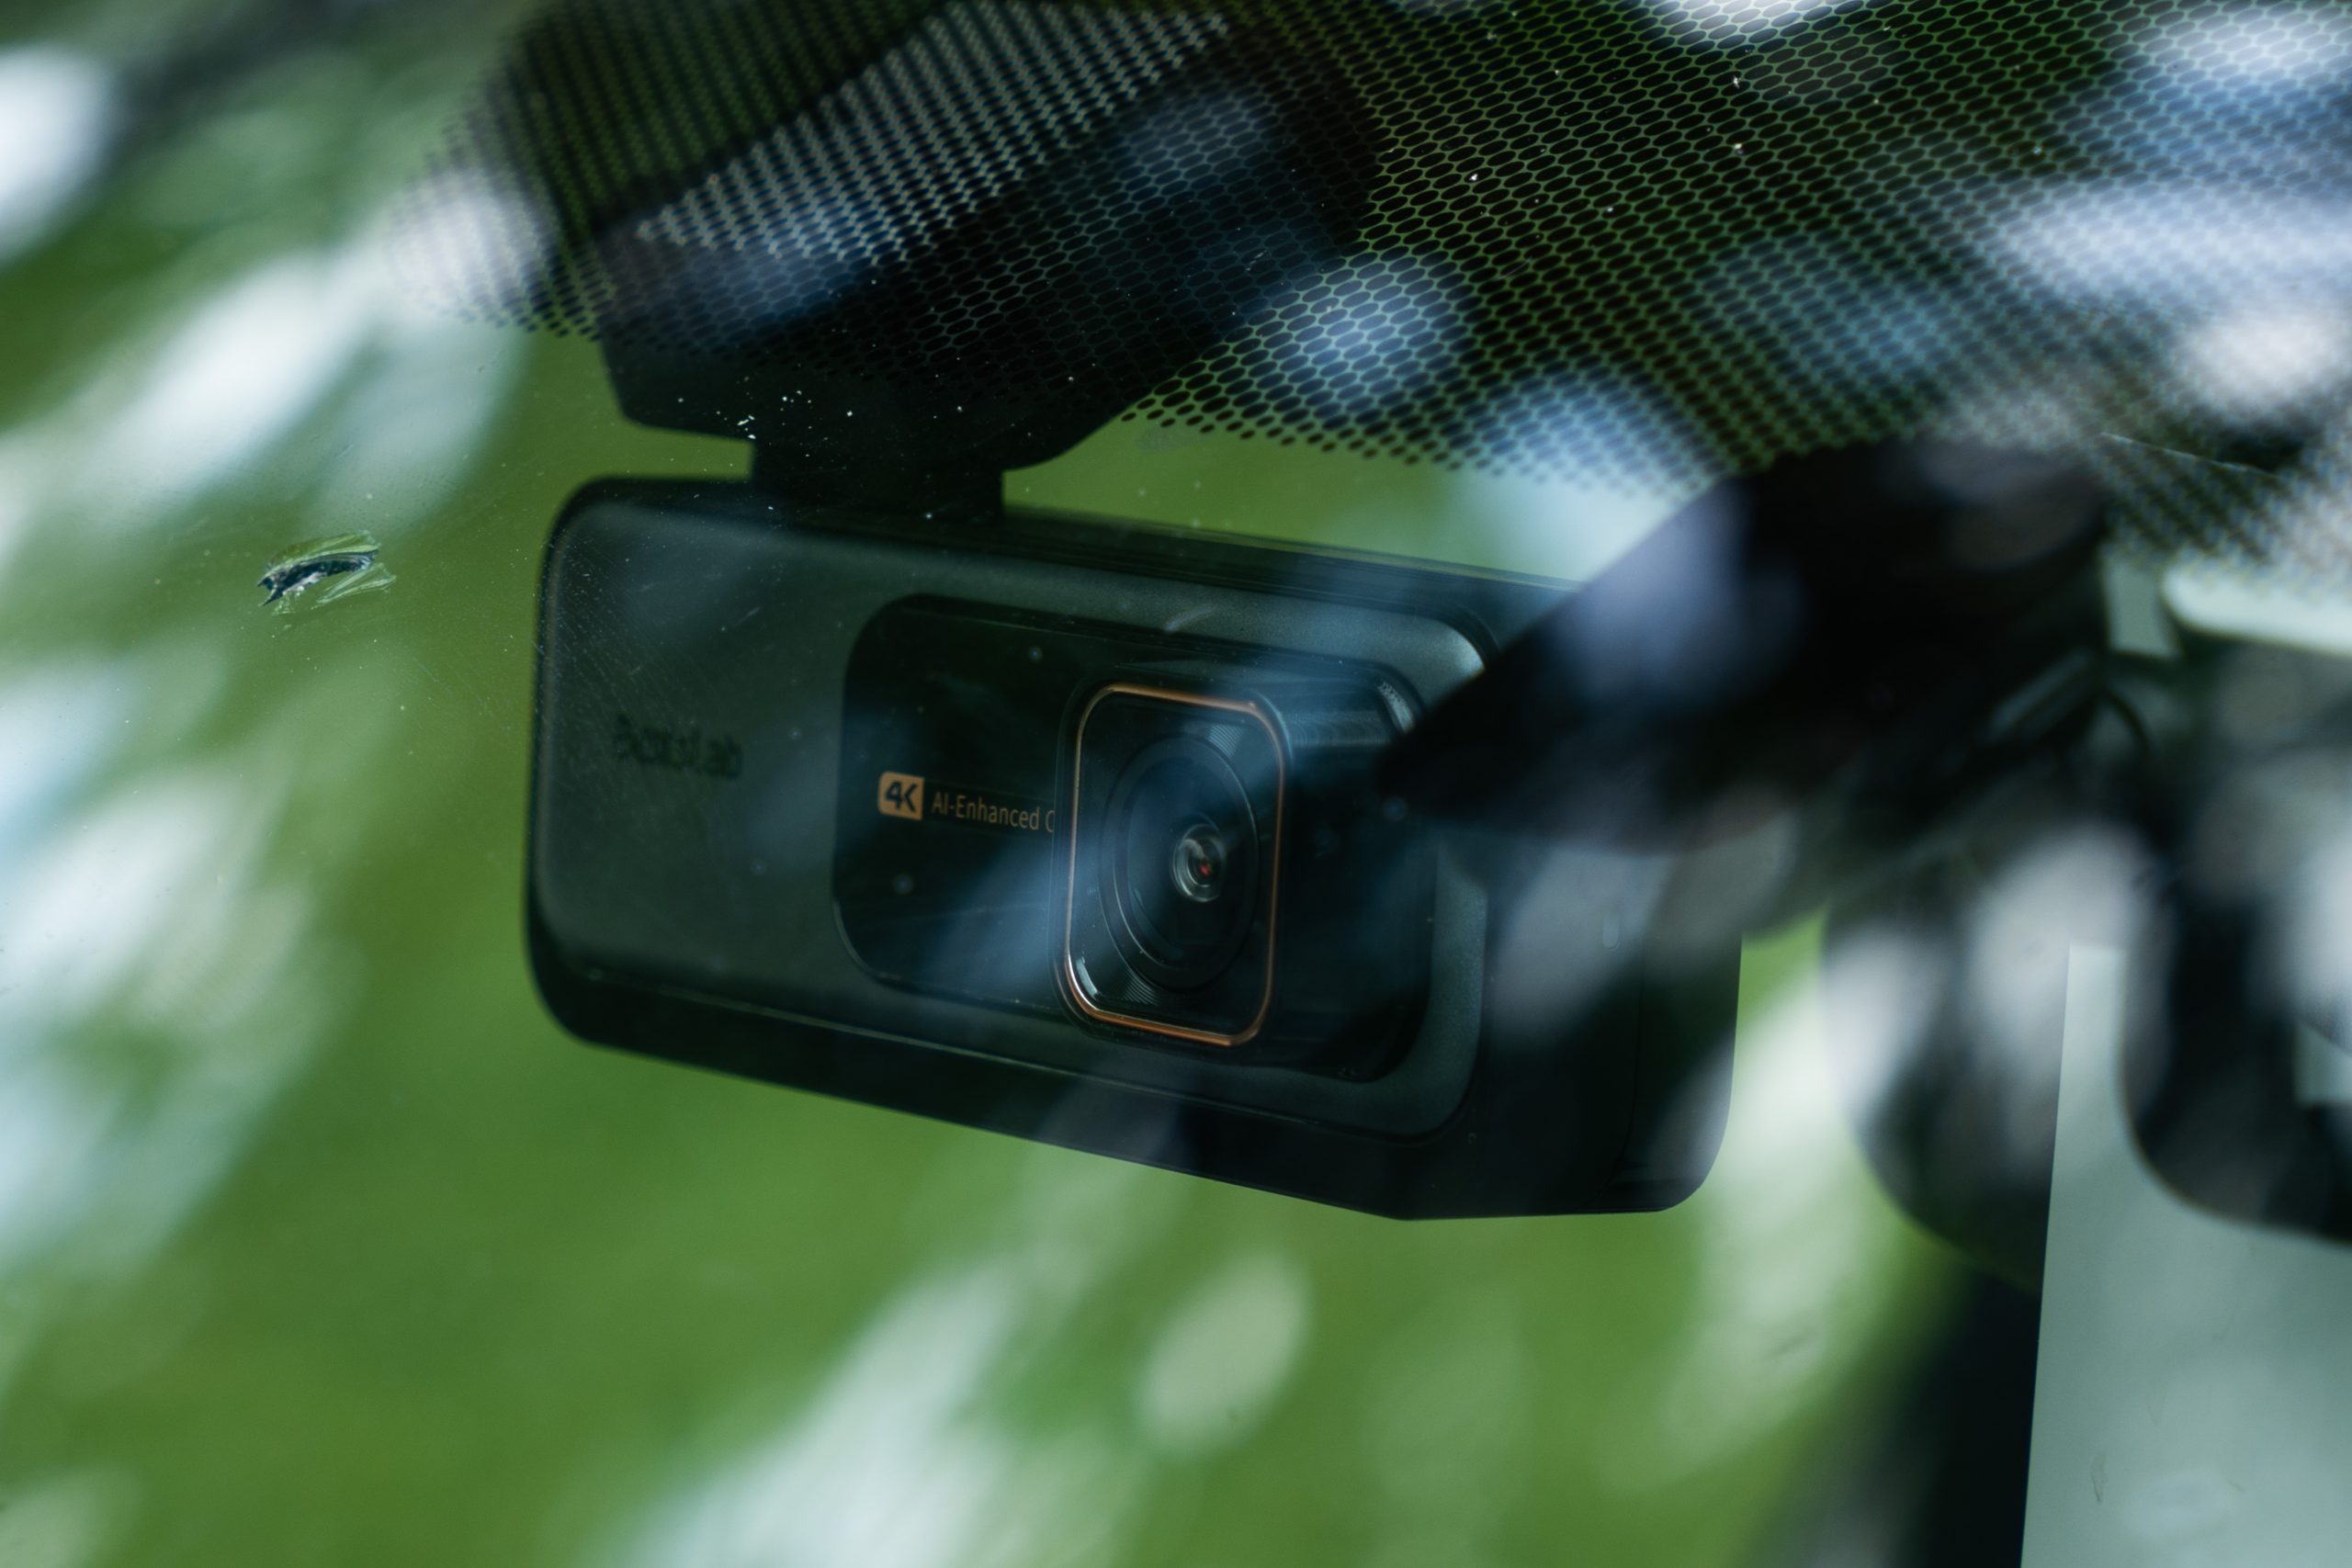 Botslab G980H Dashcam captures your driving in stunning 4K - Phandroid